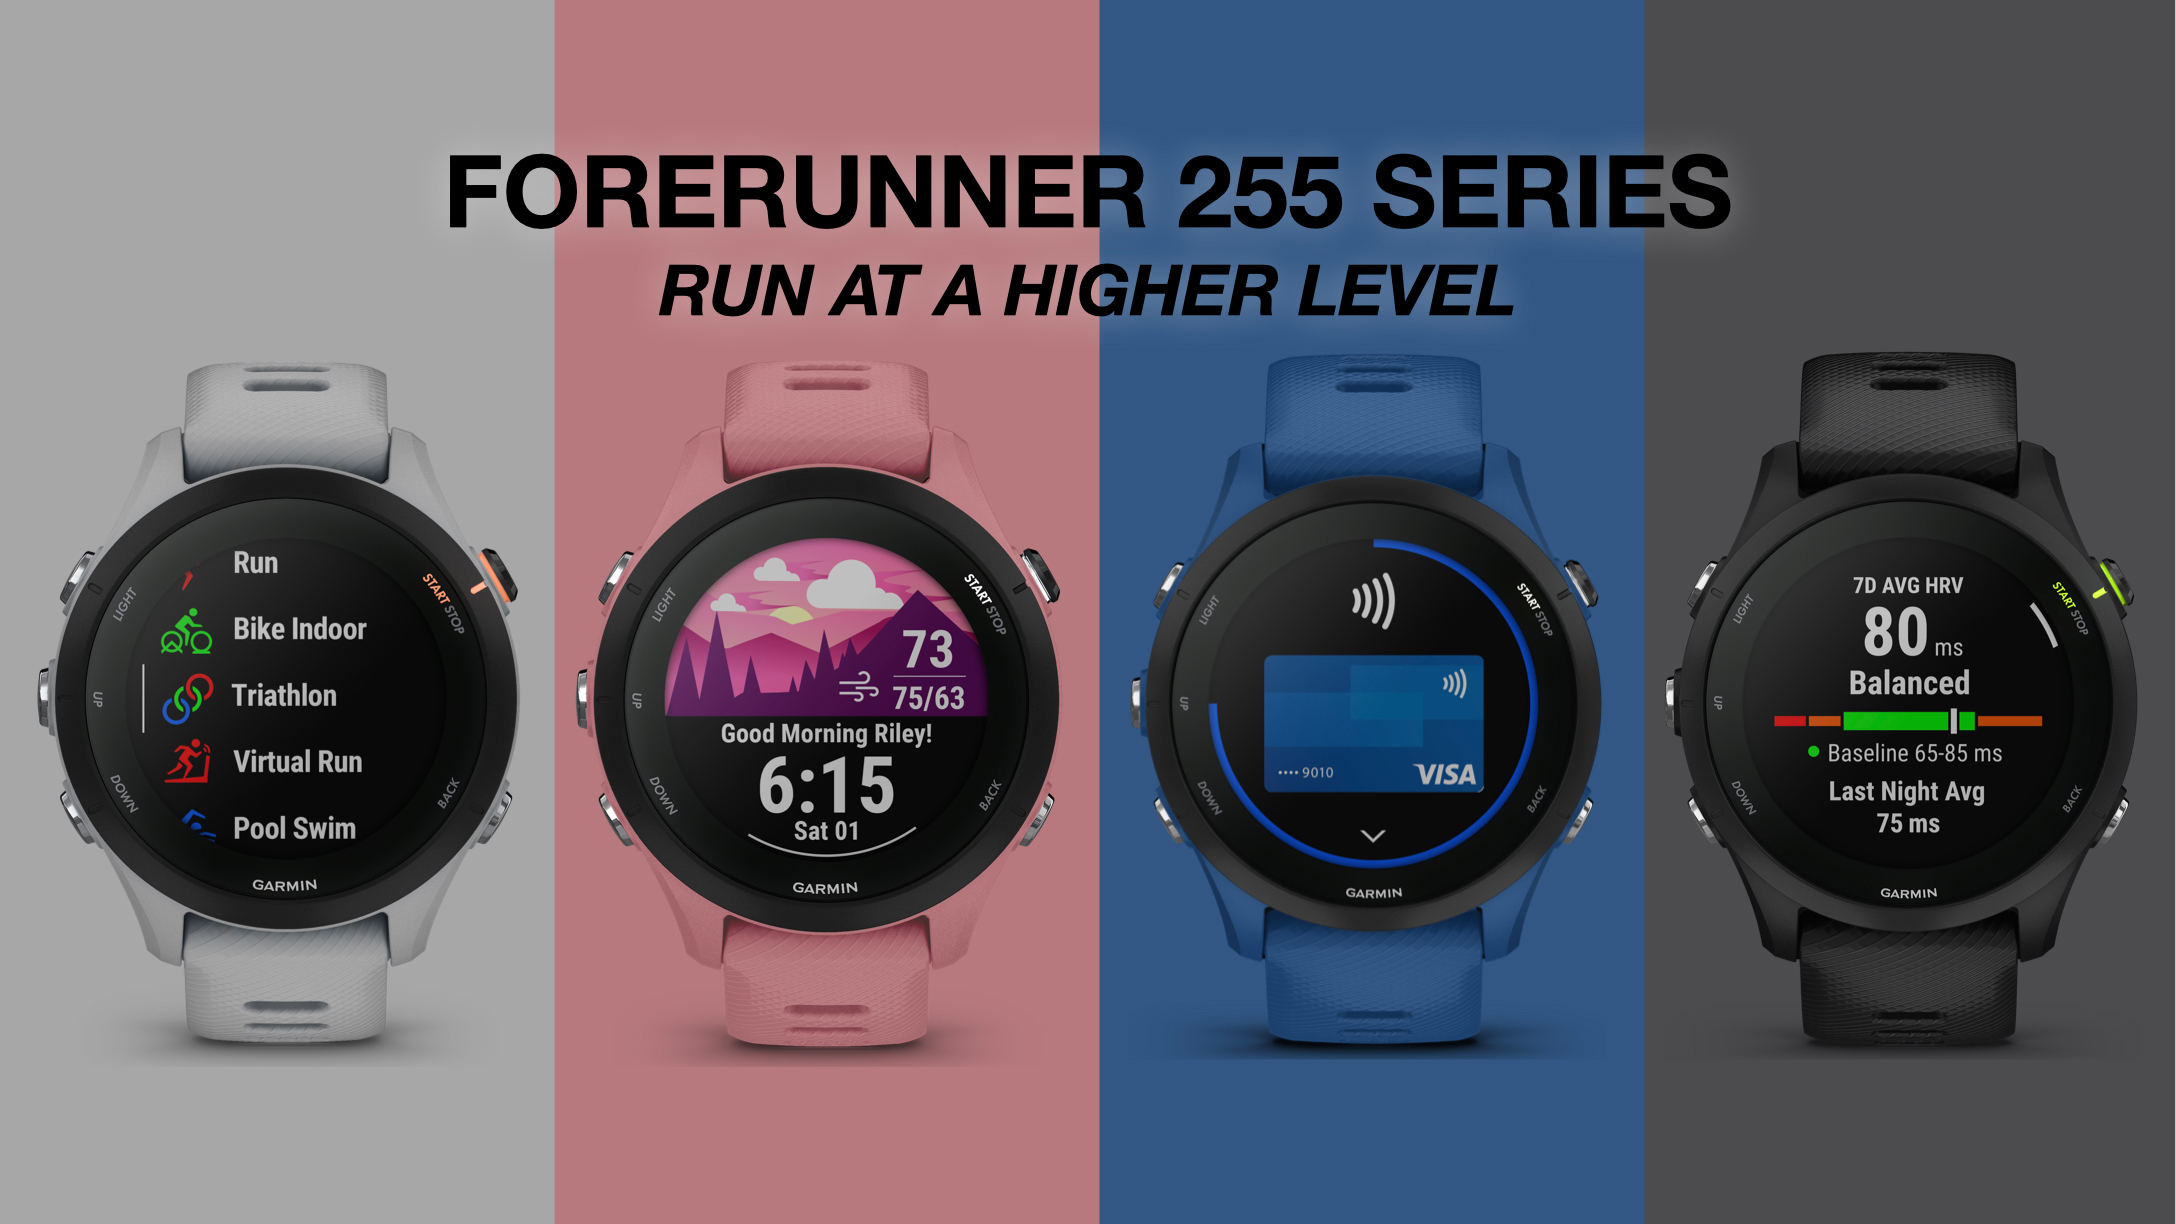 Garmin celebrates Global Running Day with the introduction of the